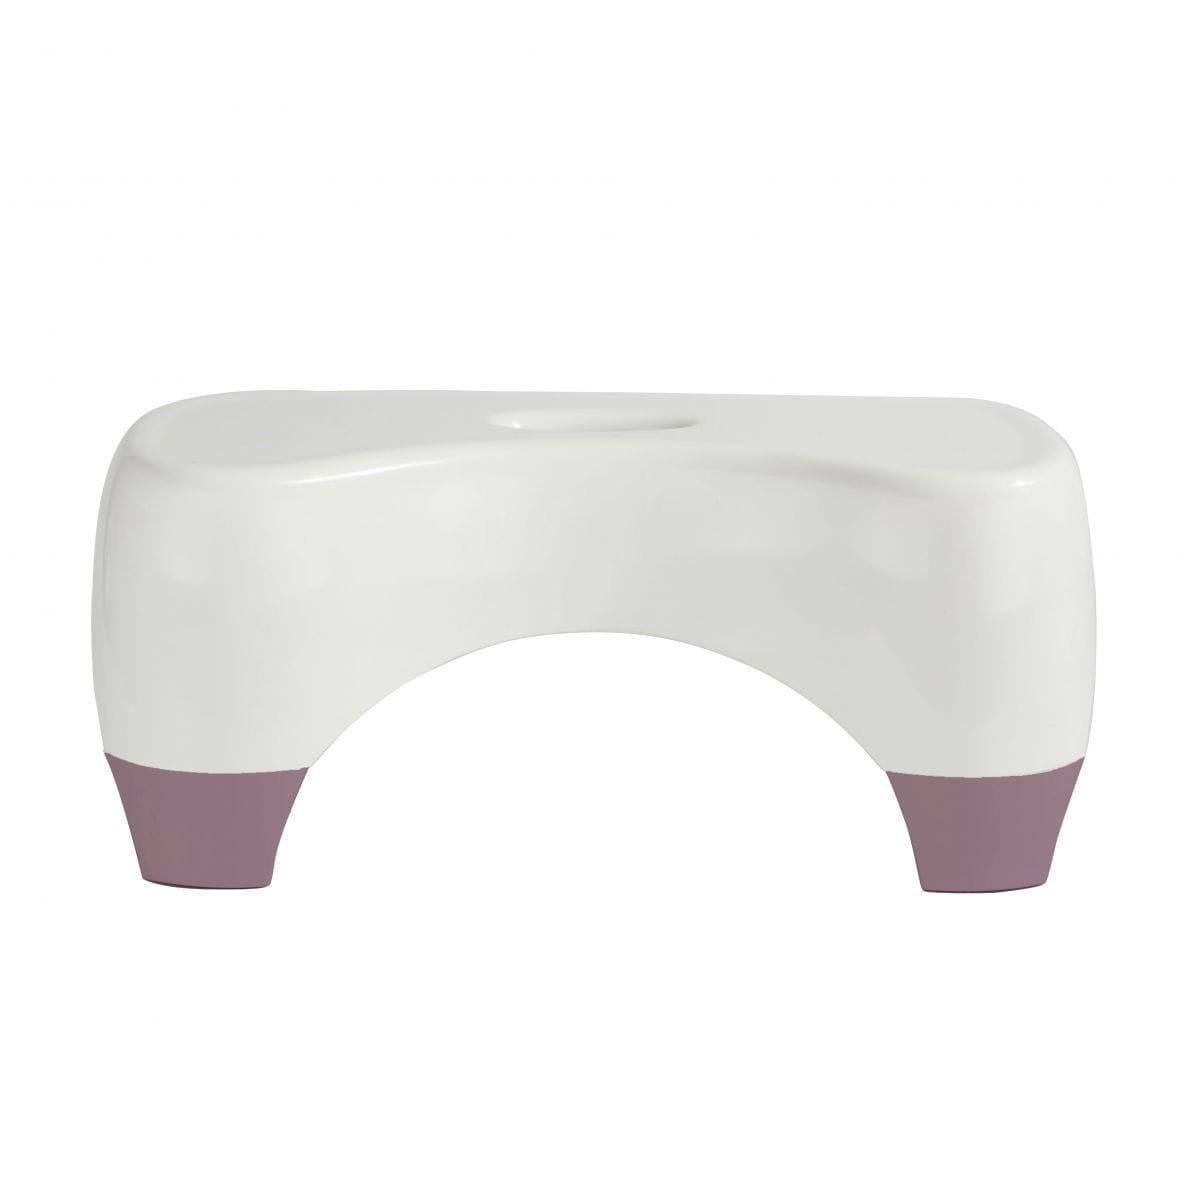 Squatty Potty Toilet Stool With Durable Plastic Material